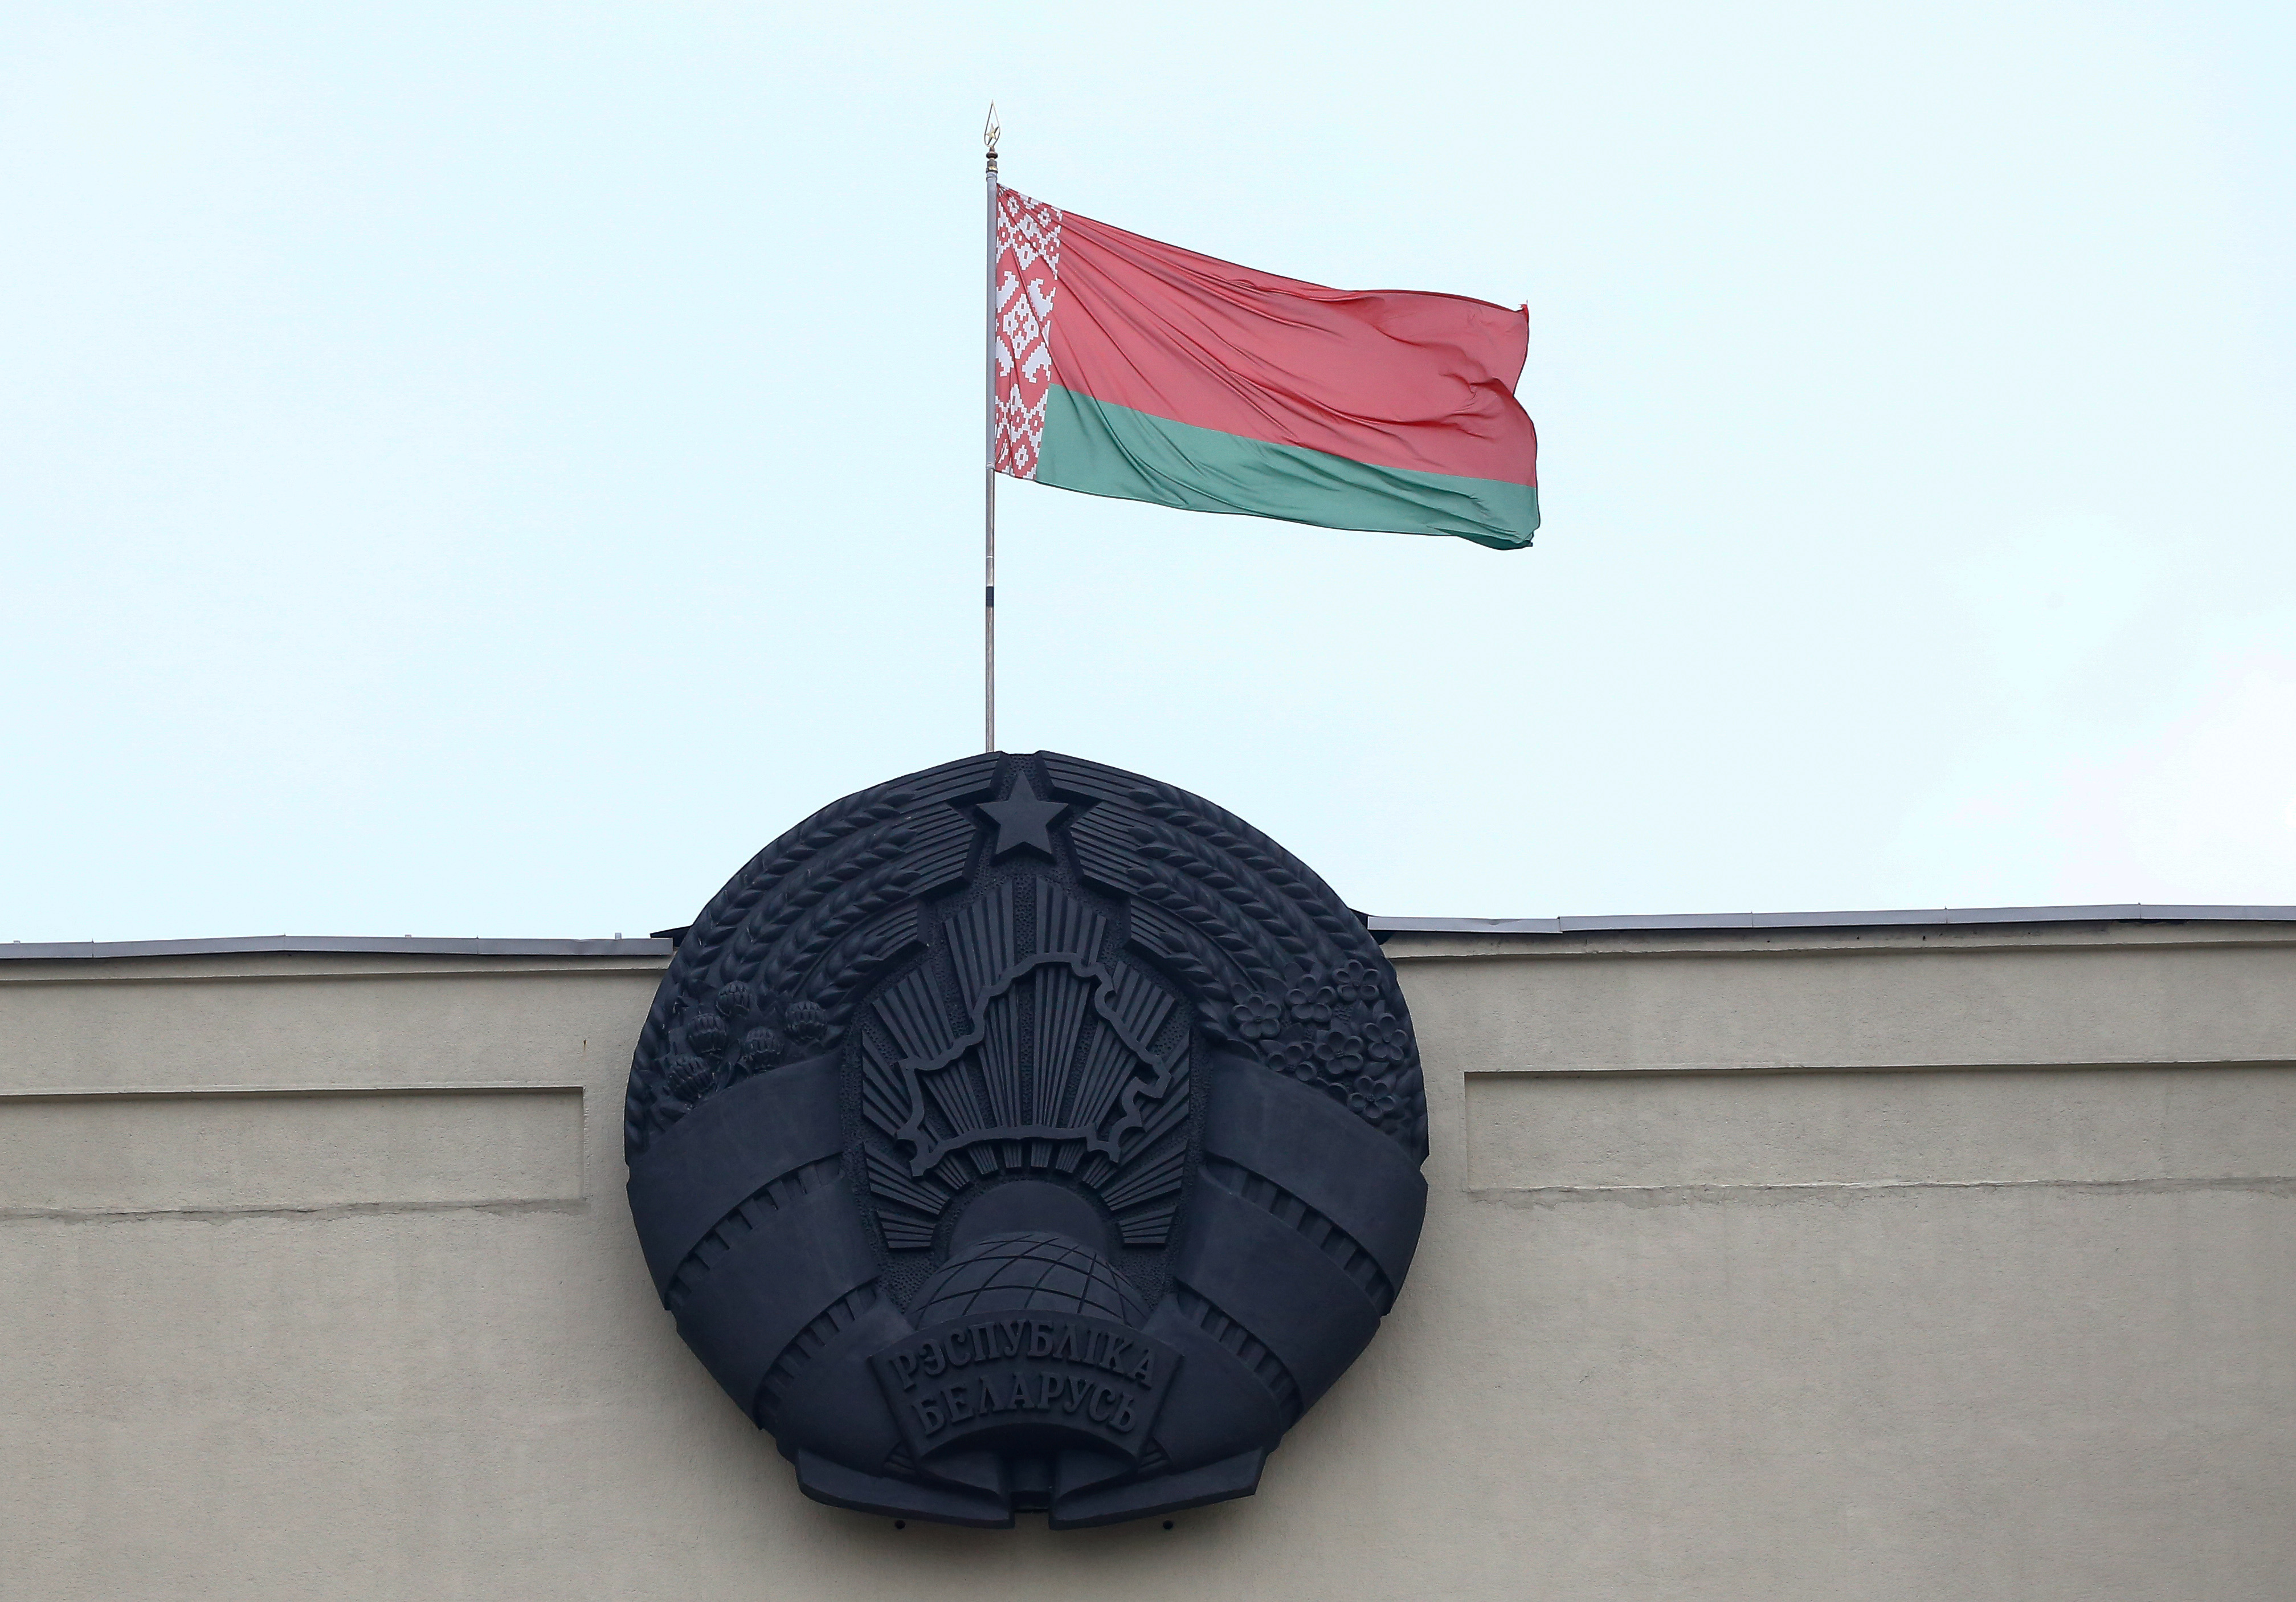 Belarusian state flag and emblem are seen on a building at Independence Square in Minsk